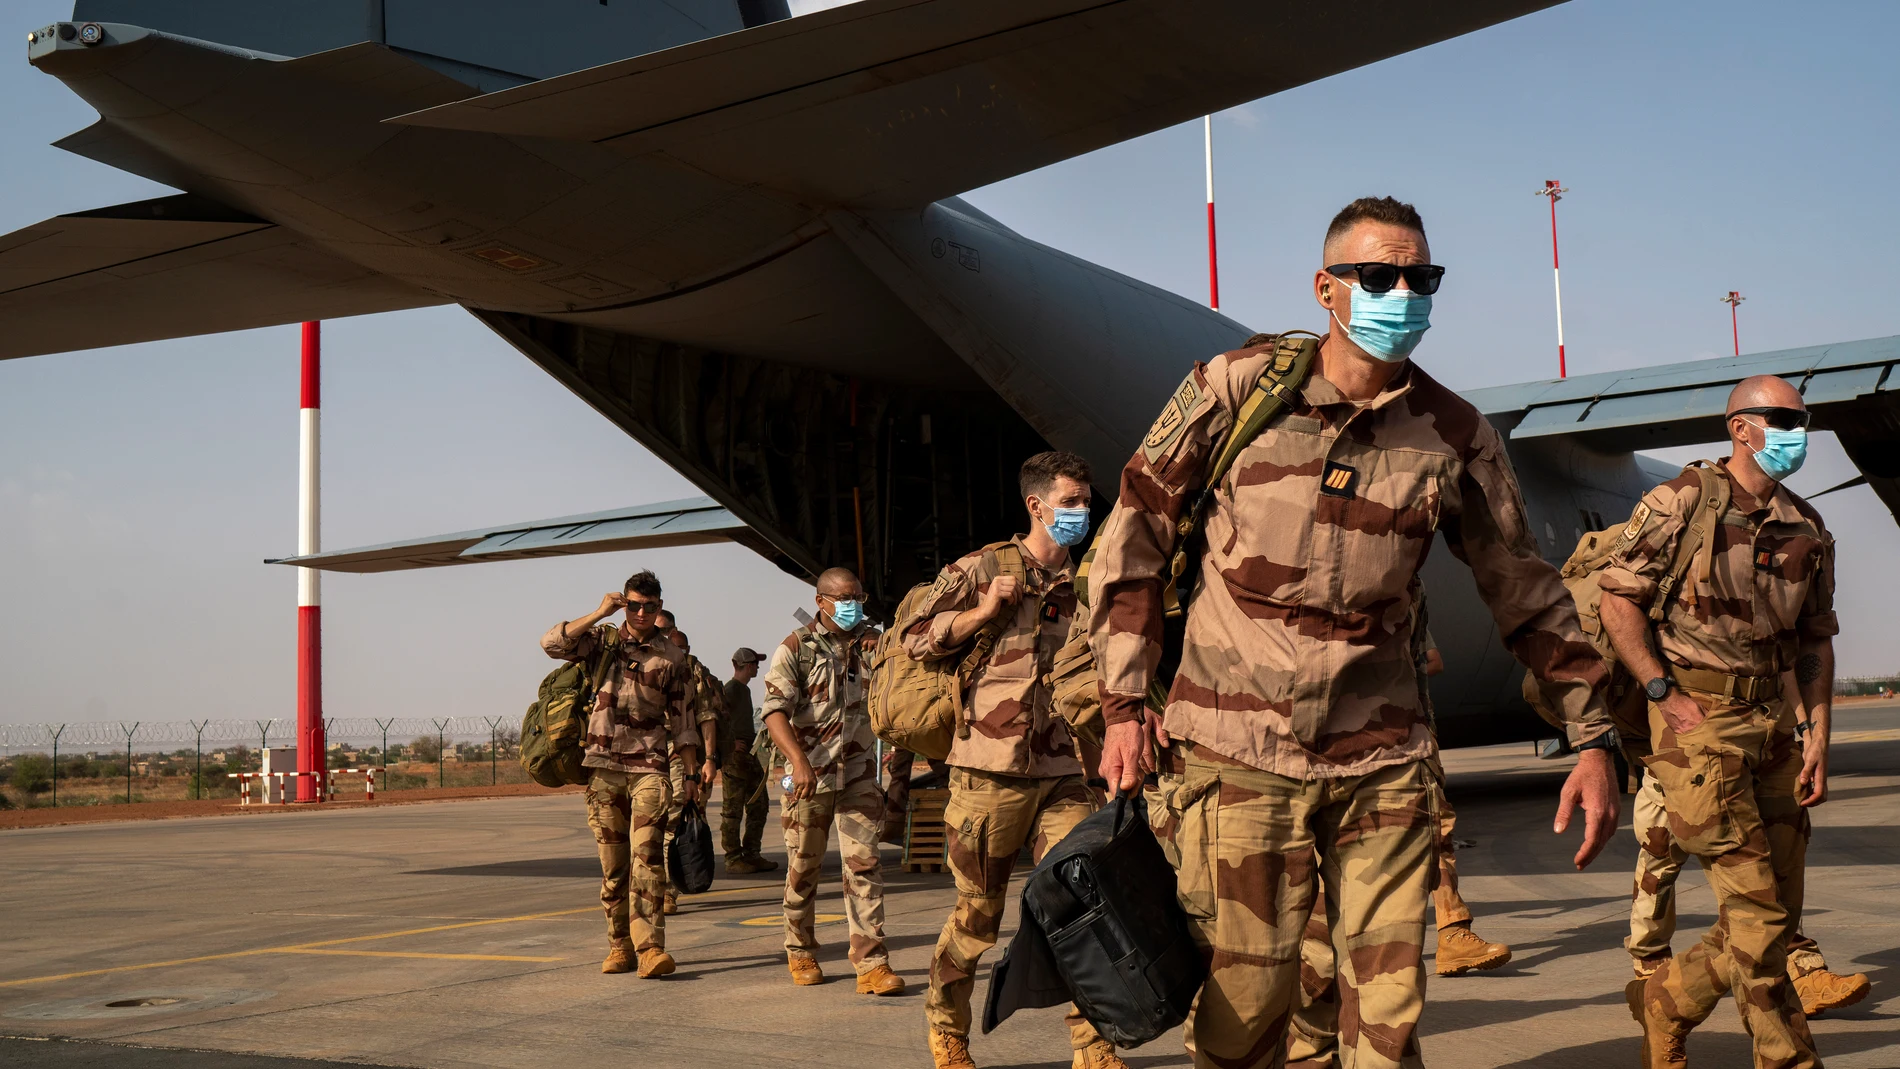 FILE - French soldiers disembark from a U.S. Air Force C130 cargo plane at Niamey, Niger base, on June 9, 2021. France on Friday Dec. 22, 2023 completed the withdrawal of its troops who were asked to leave Niger by the country’s new junta, ending years of on-the-ground military support and raising concerns from analysts about a gap in the fight against jihadi violence across Africa’s Sahel. (AP Photo/Jerome Delay, File)